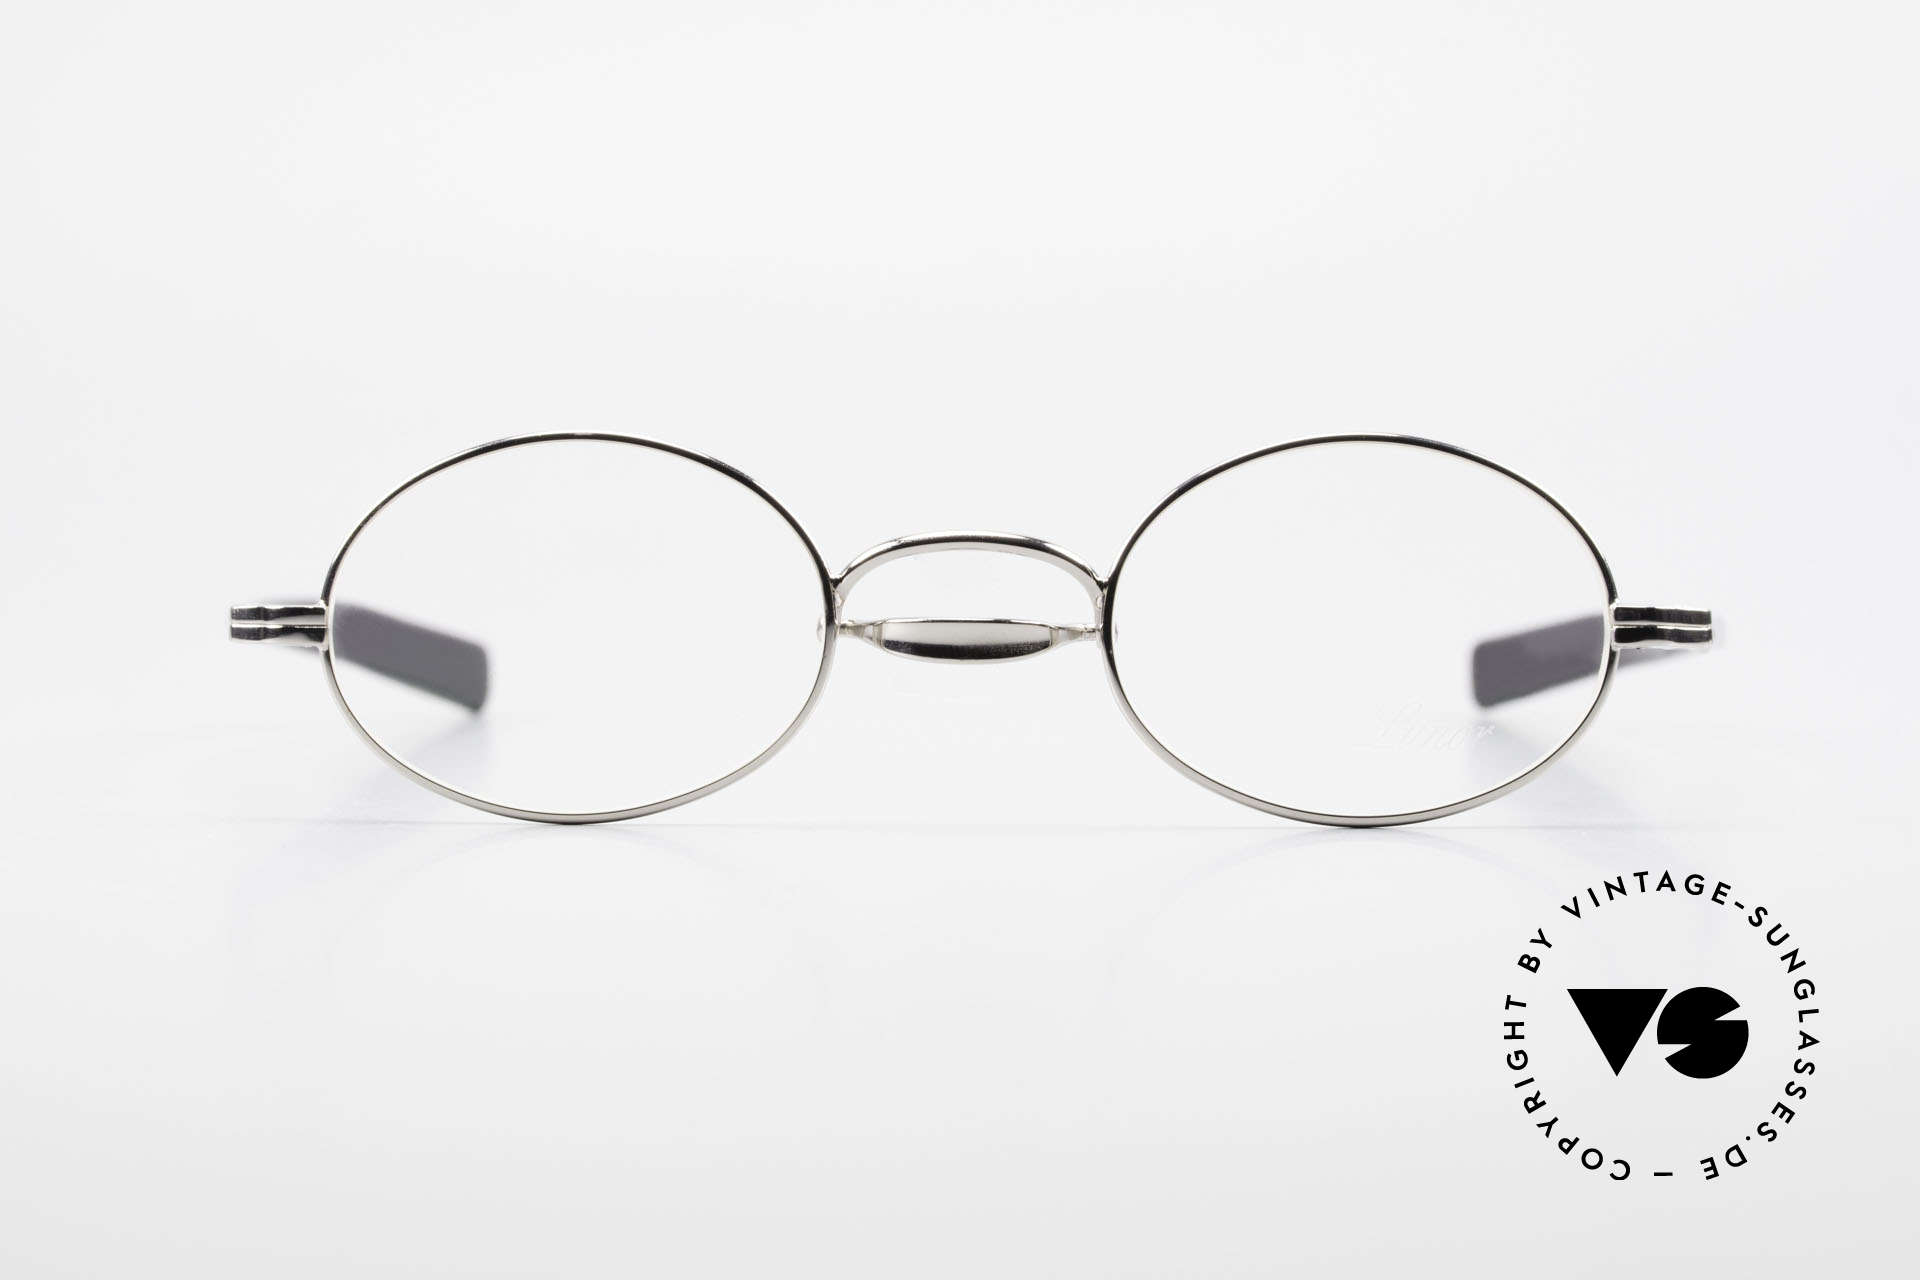 Lunor Swing A 33 Oval Swing Bridge Vintage Glasses, traditional German brand; quality handmade in Germany, Made for Men and Women